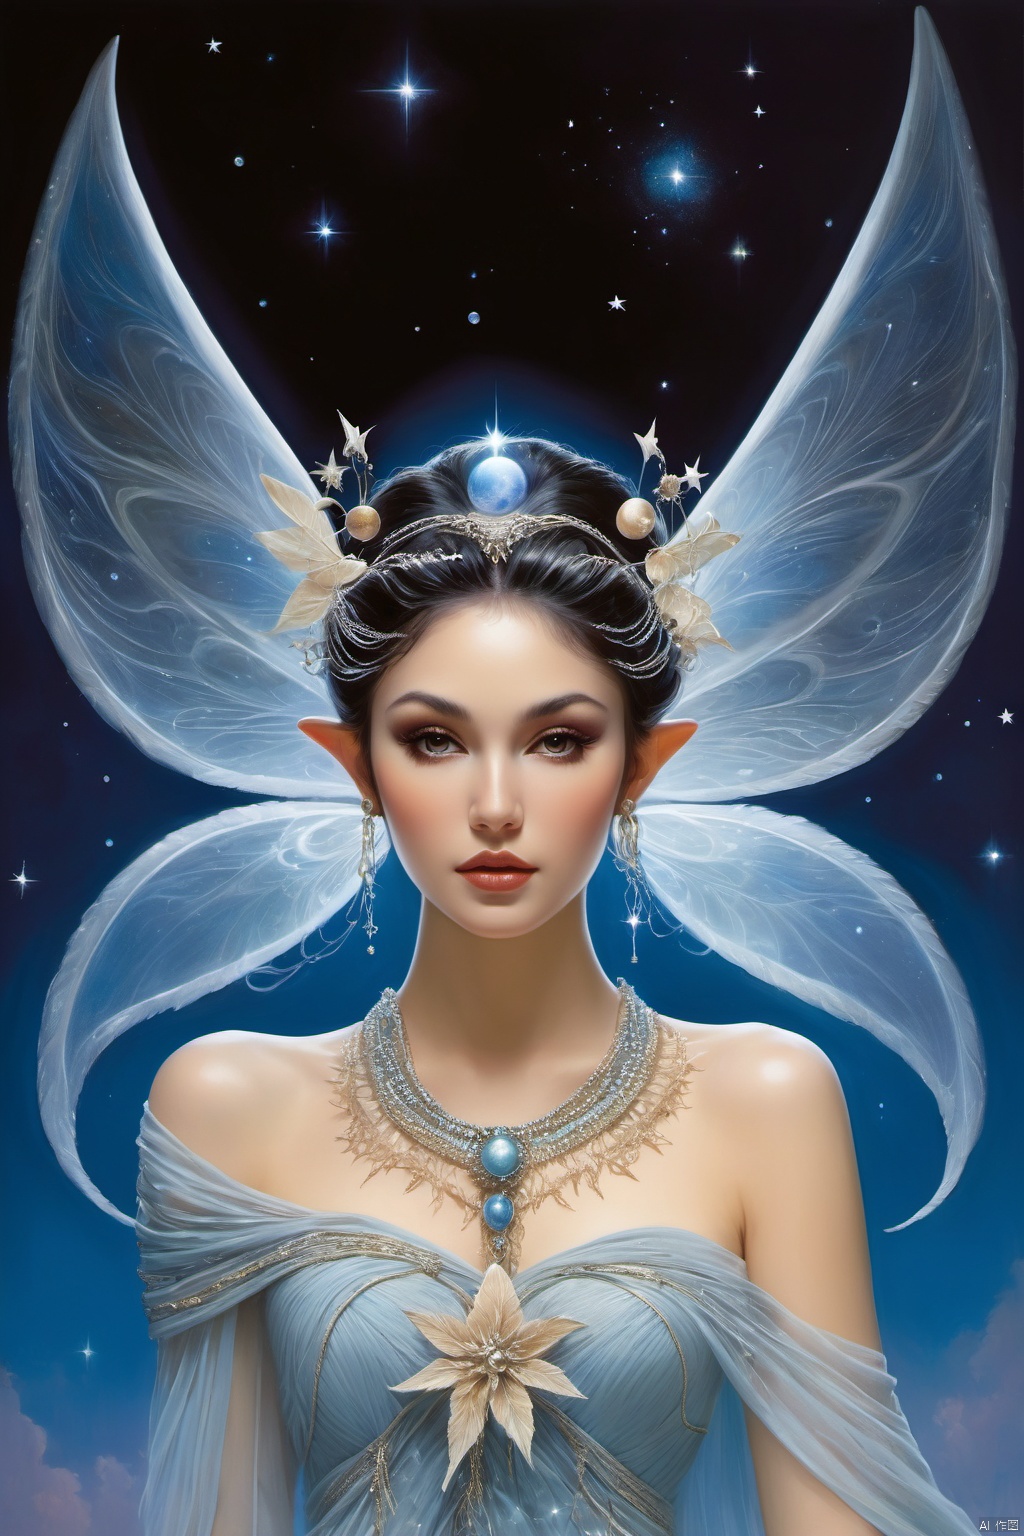  A conceptual masterpiece by Boris Vallejo, featuring a (((lunar fae))) intricately adorned with a (((macramé hairstyle))), composed of stars, moons, and stardust. The fae's ethereal wings are semi-transparent, with a softly glowing aura encircling them. The fae's outfit is a breathtaking mix of pearls and glowing gemstones, set against a (twilight backdrop) with a (beautiful backlight illuminating the figure). A swirling halo of smoky mist completes this (otherworldly scene)